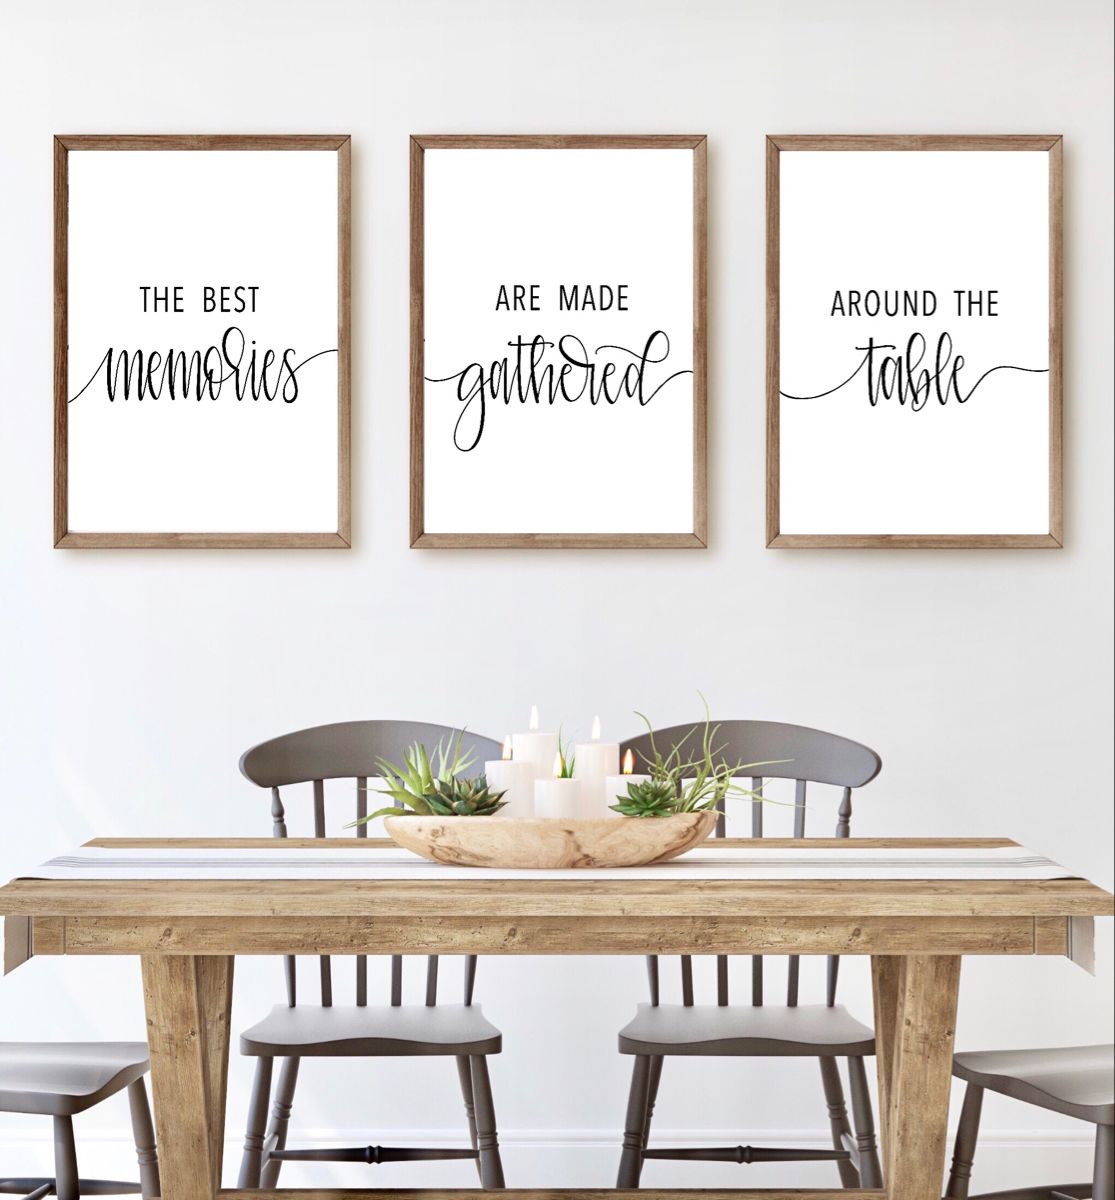 Home decor with personalized artwork